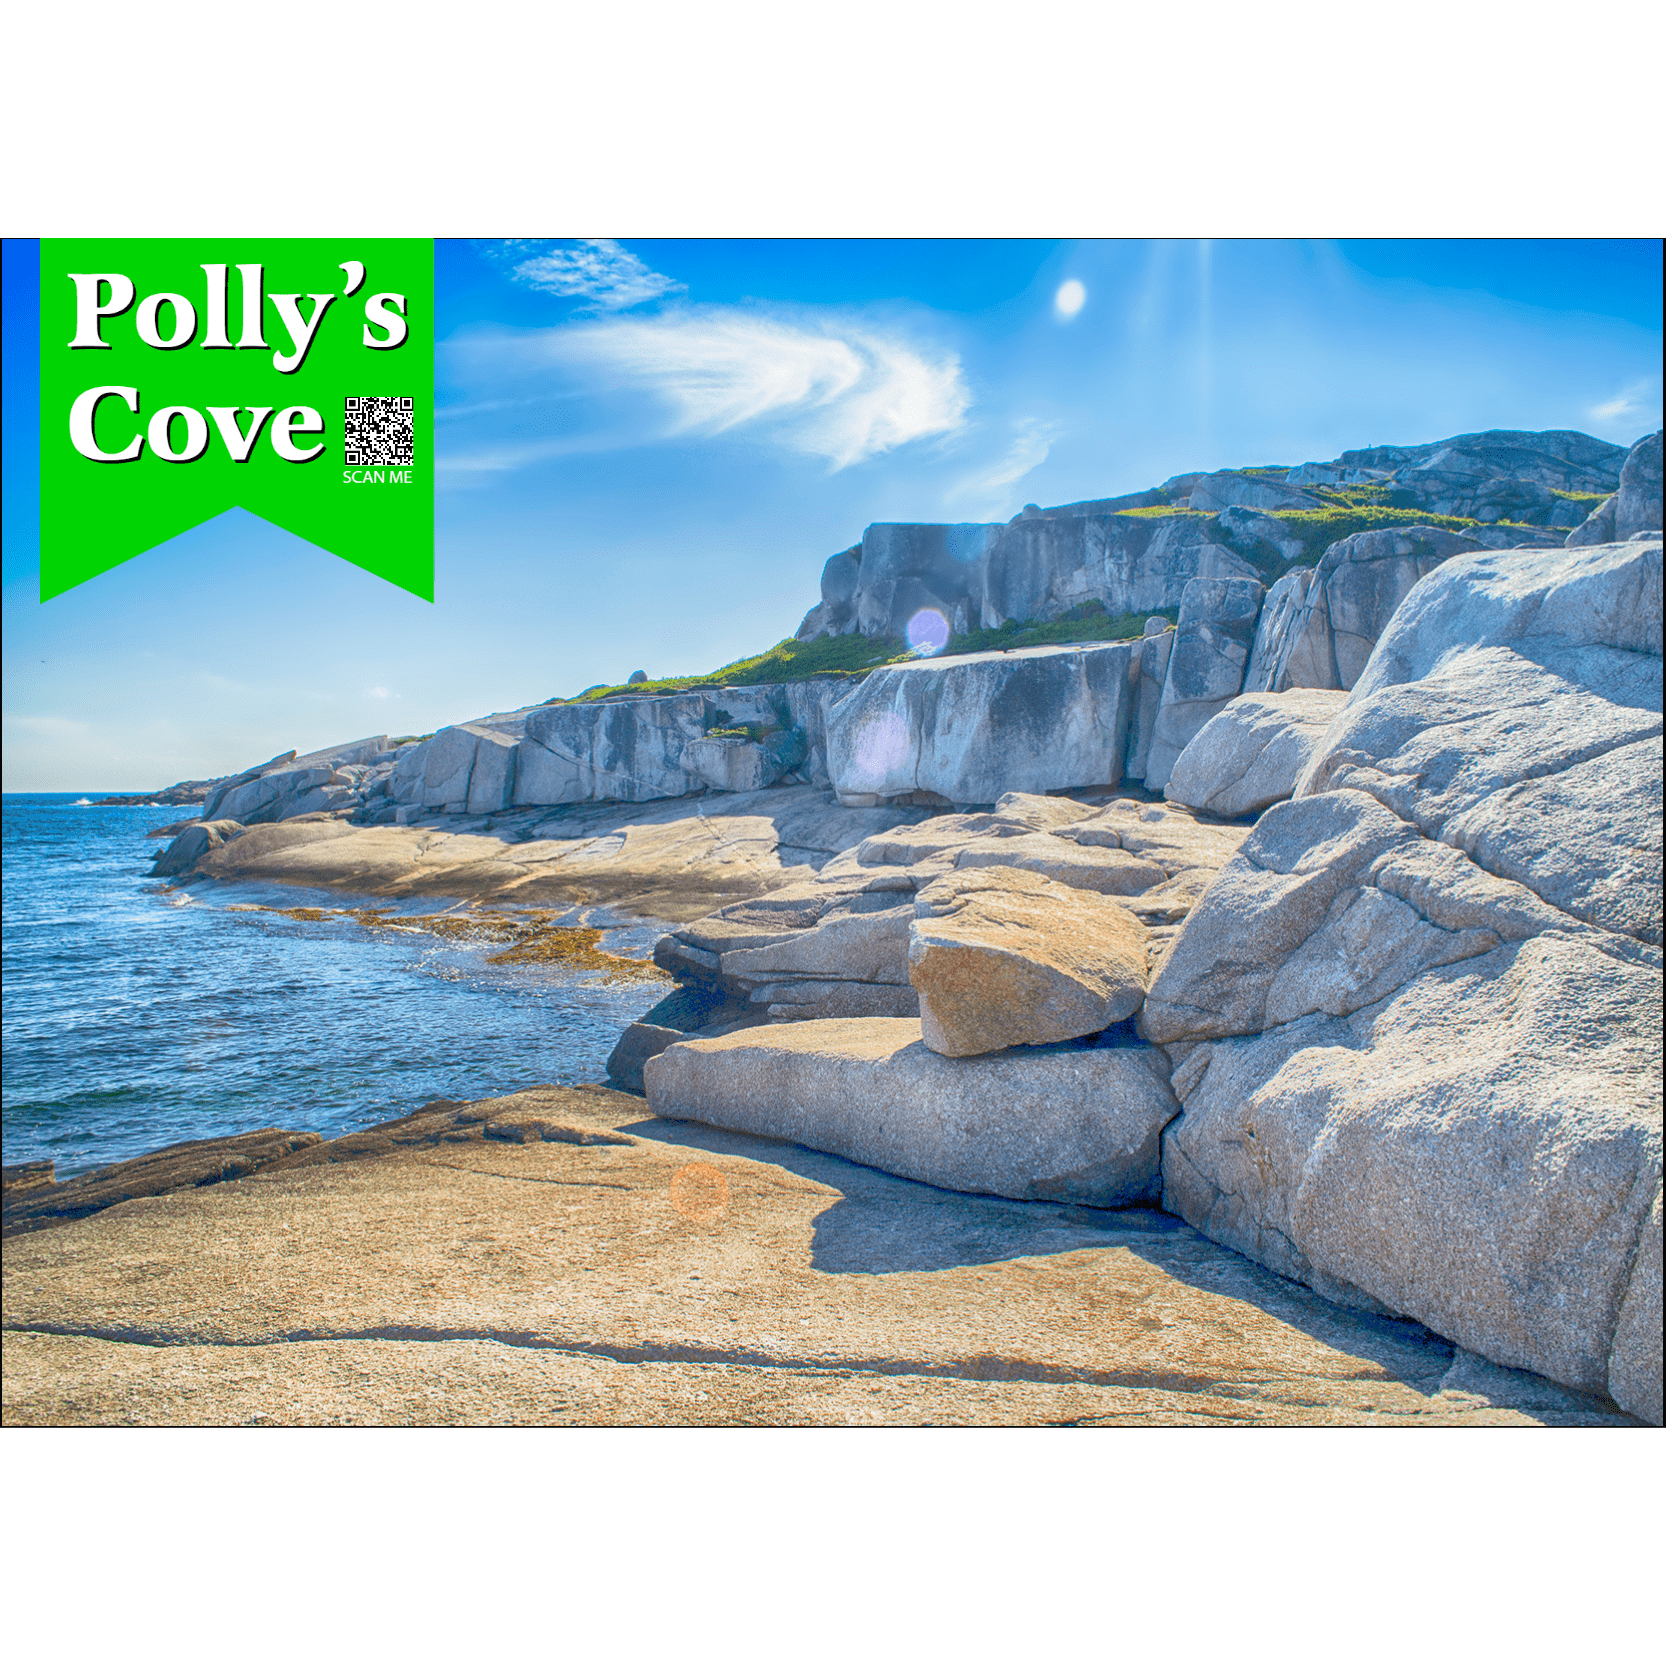 Polly's Cove